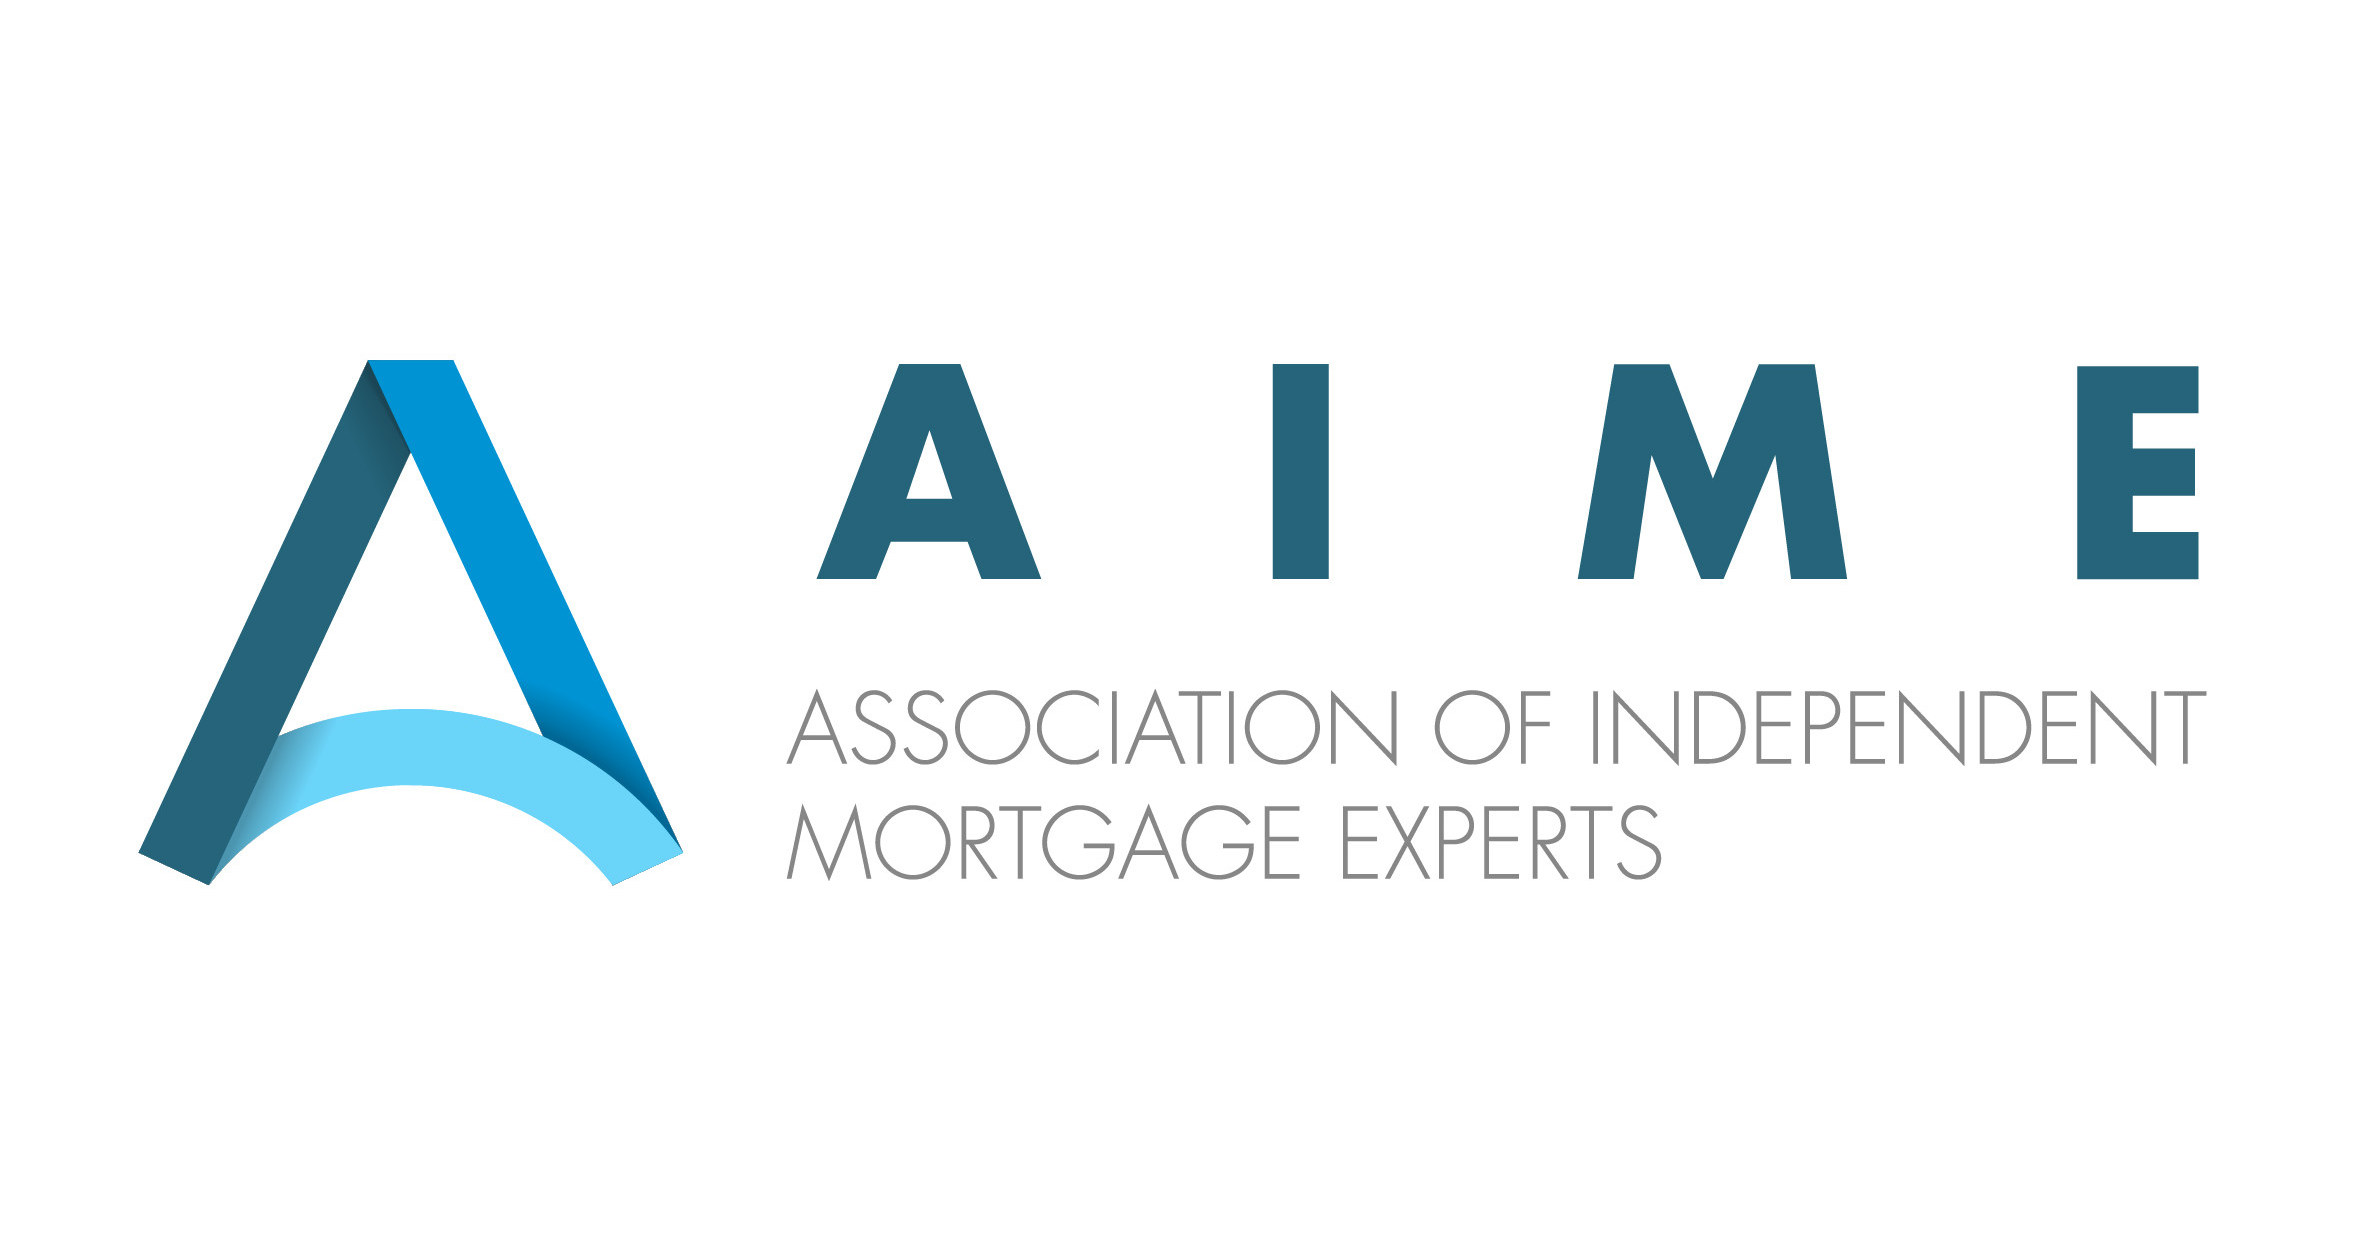 Newly Formed Association of Independent Mortgage Experts (AIME) Aims to